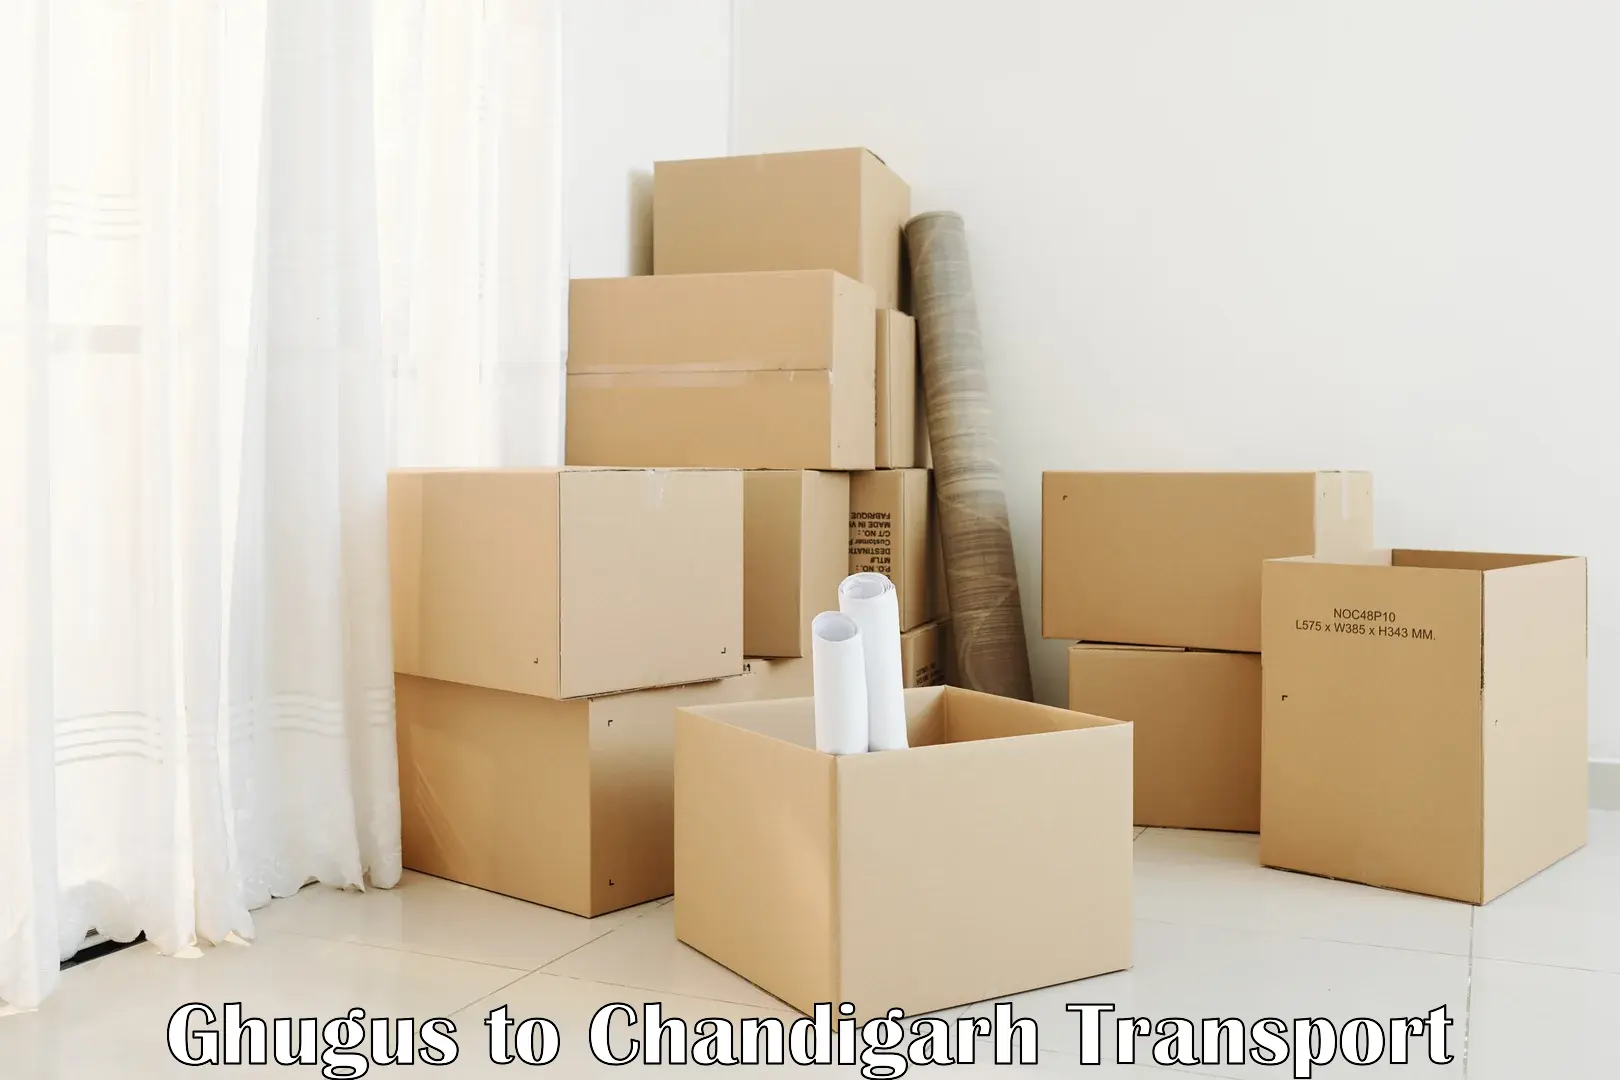 Vehicle parcel service Ghugus to Chandigarh